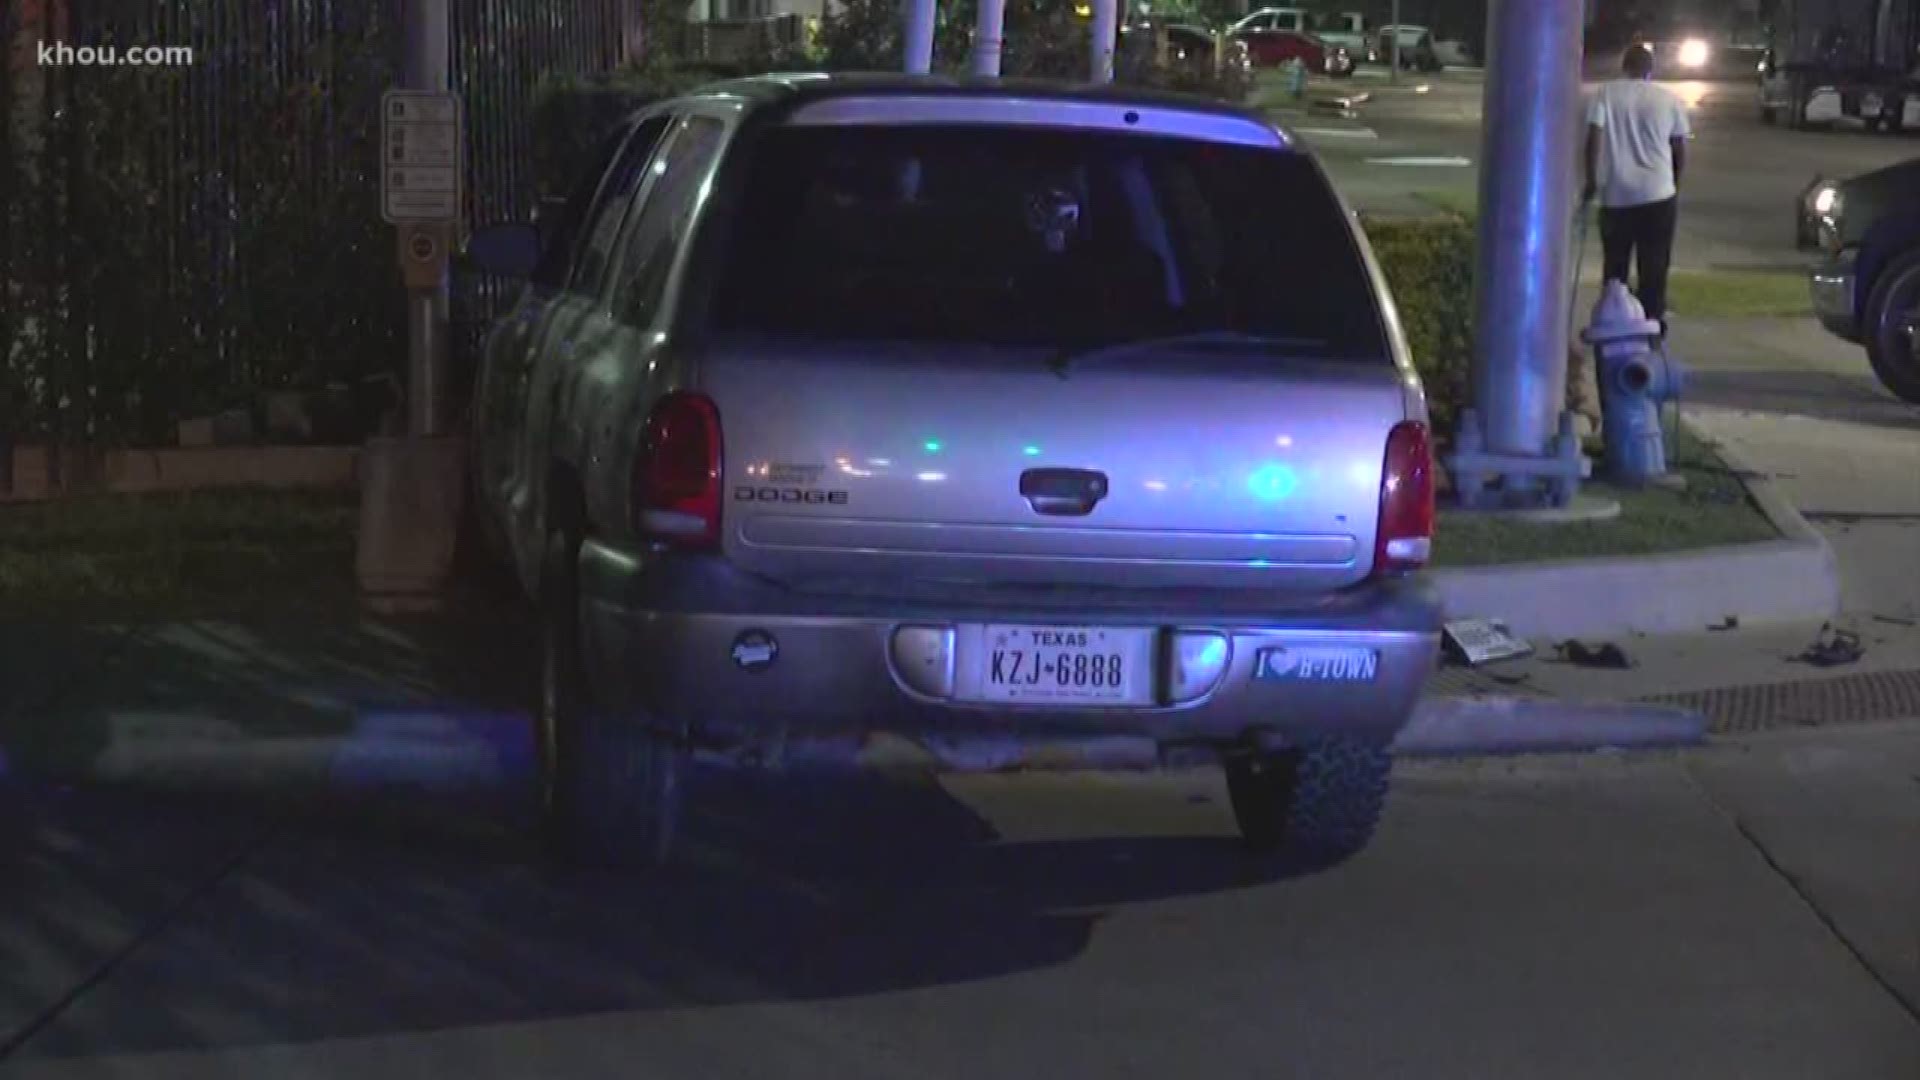 Police say the crash happened on Dyna in north Houston. Two vehicles collided, but one of the drivers left the scene on foot. That driver was located and arrested for suspicion of DWI, police say.